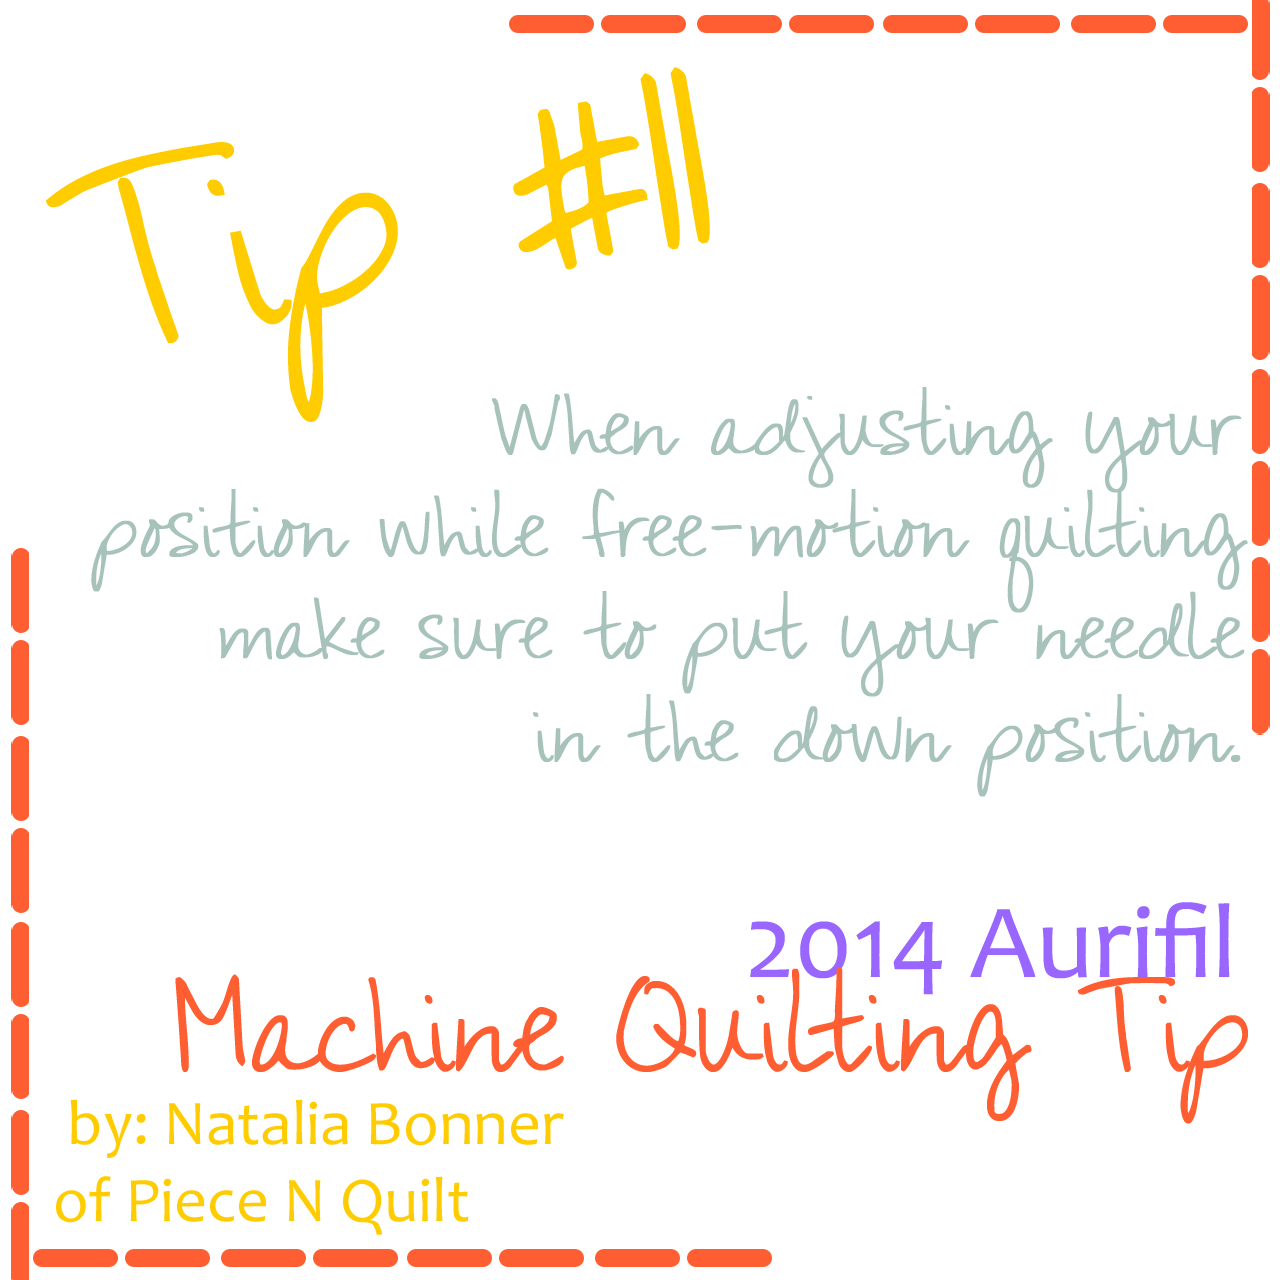 machine quilting tip for aurifil number  11